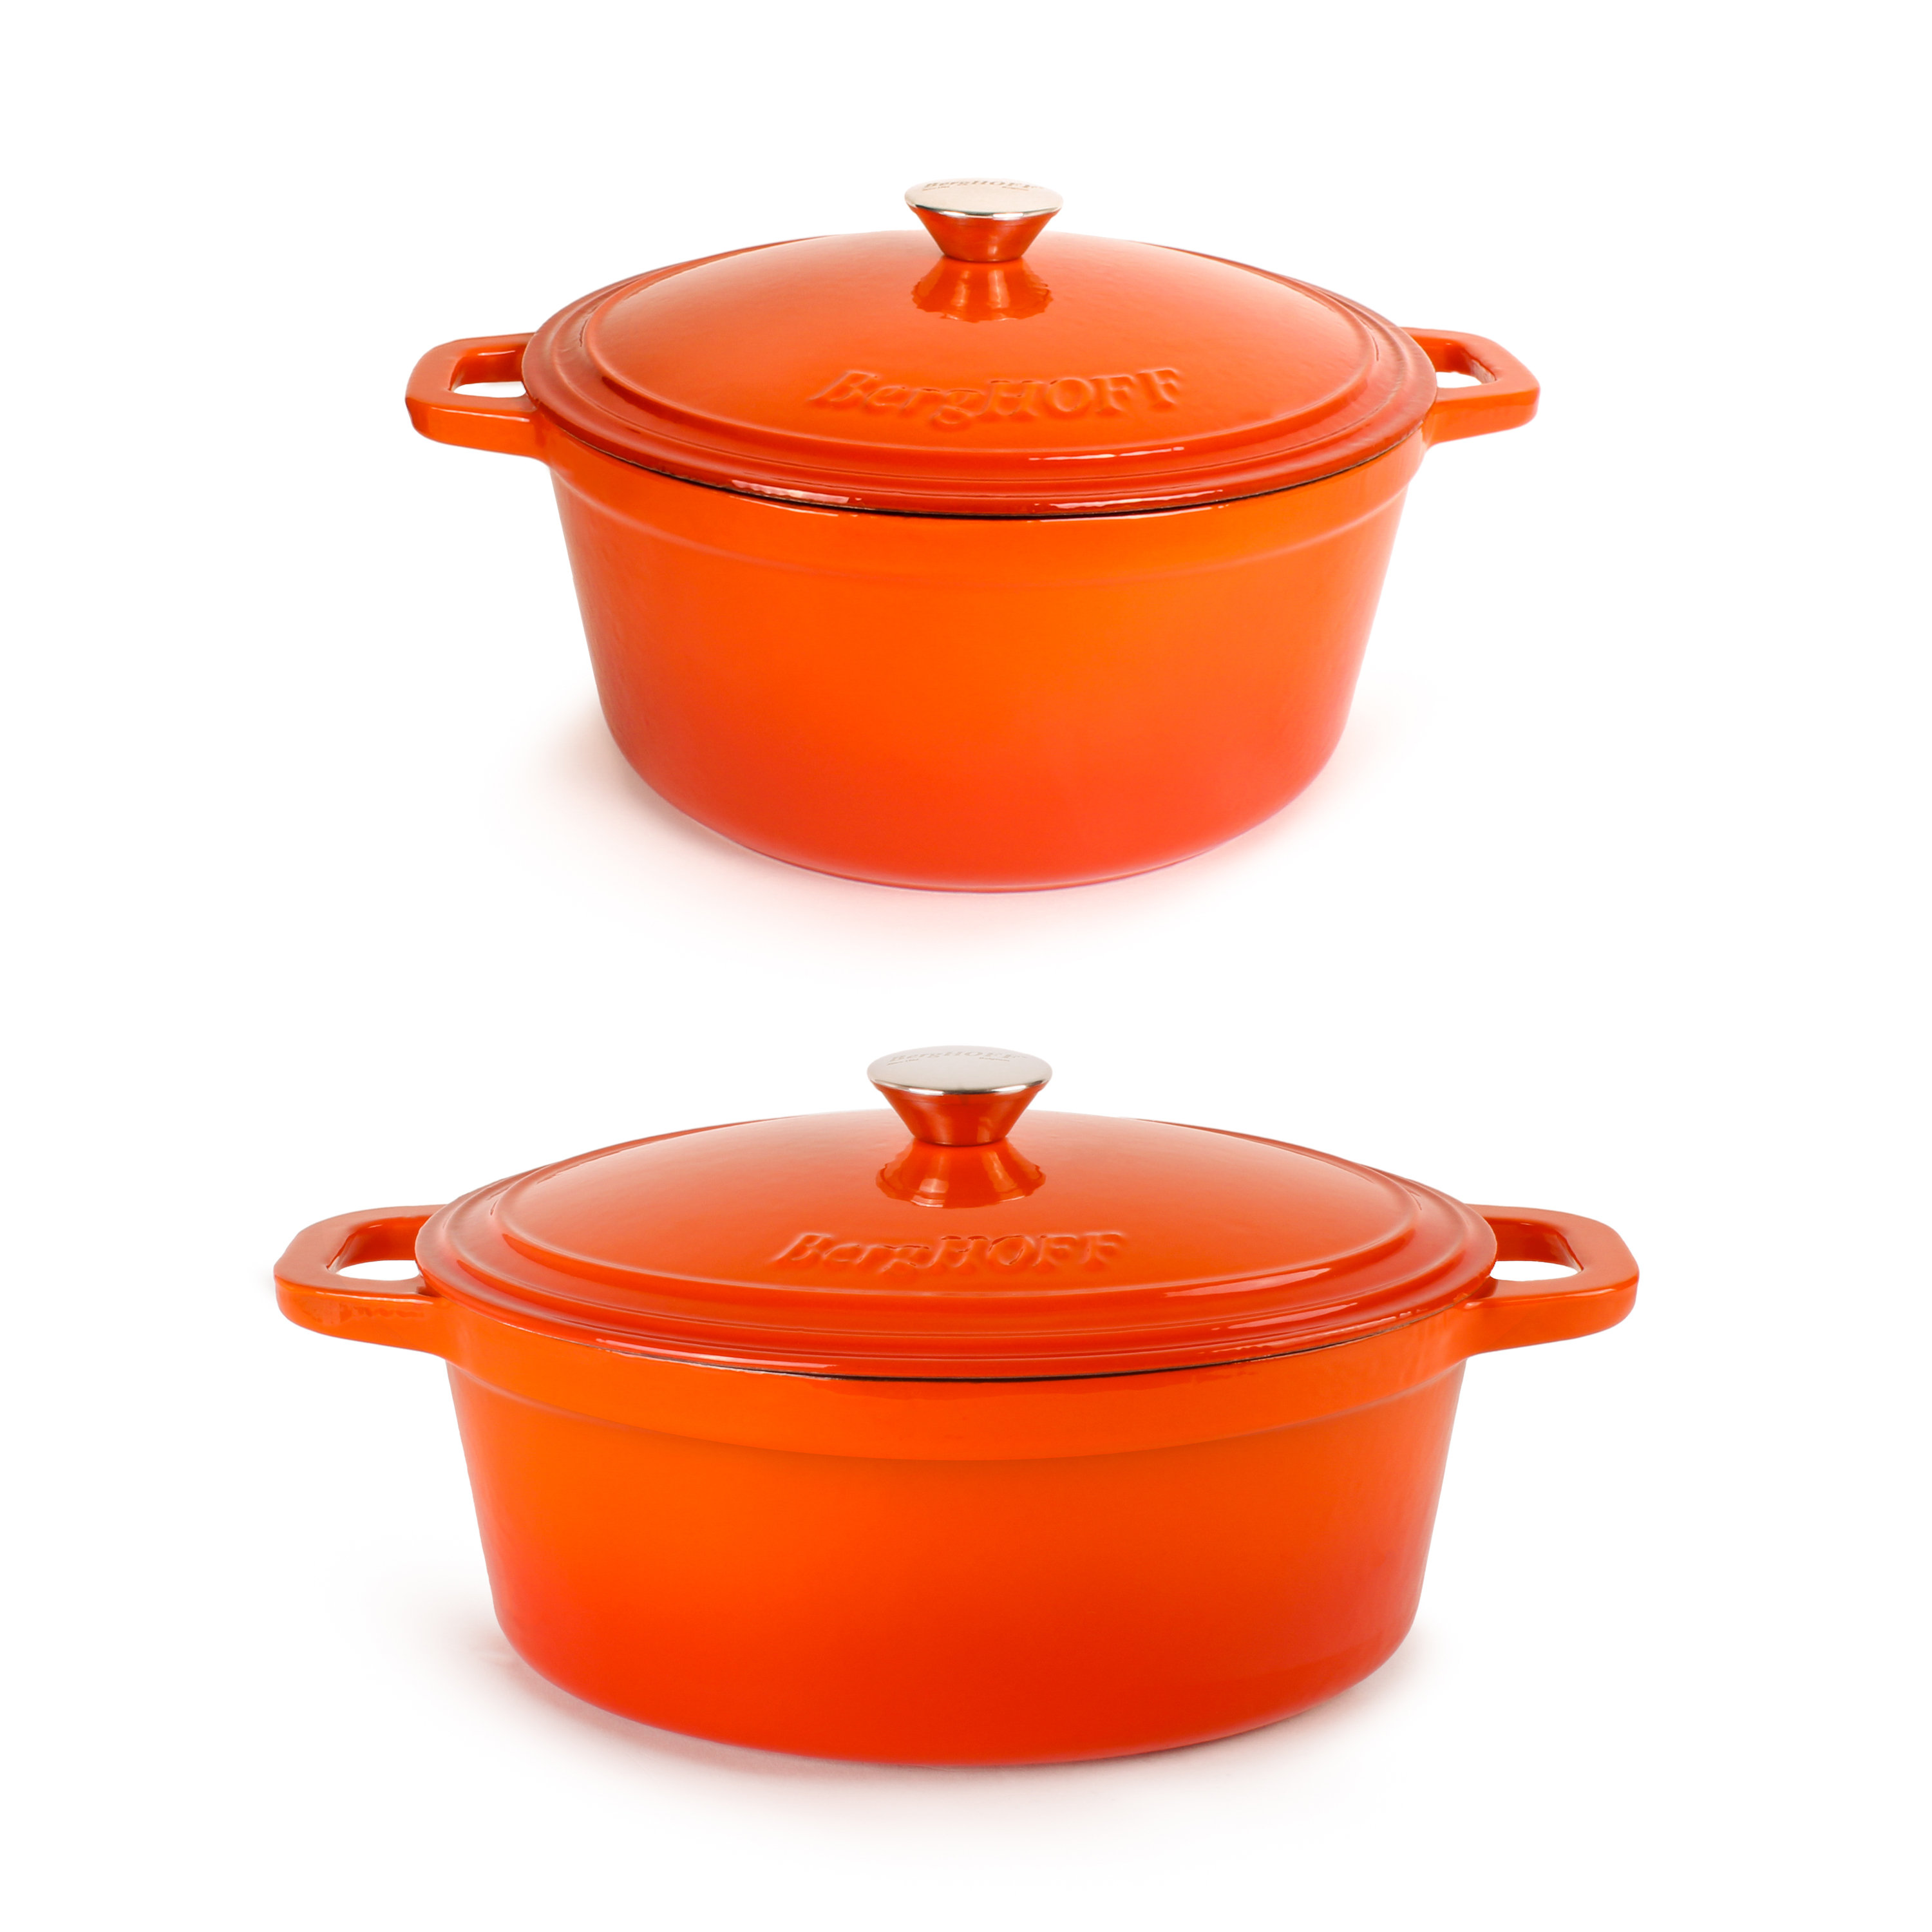 Berghoff Neo Cast Iron Cookware 3 Quart Covered Dutch Oven and 10